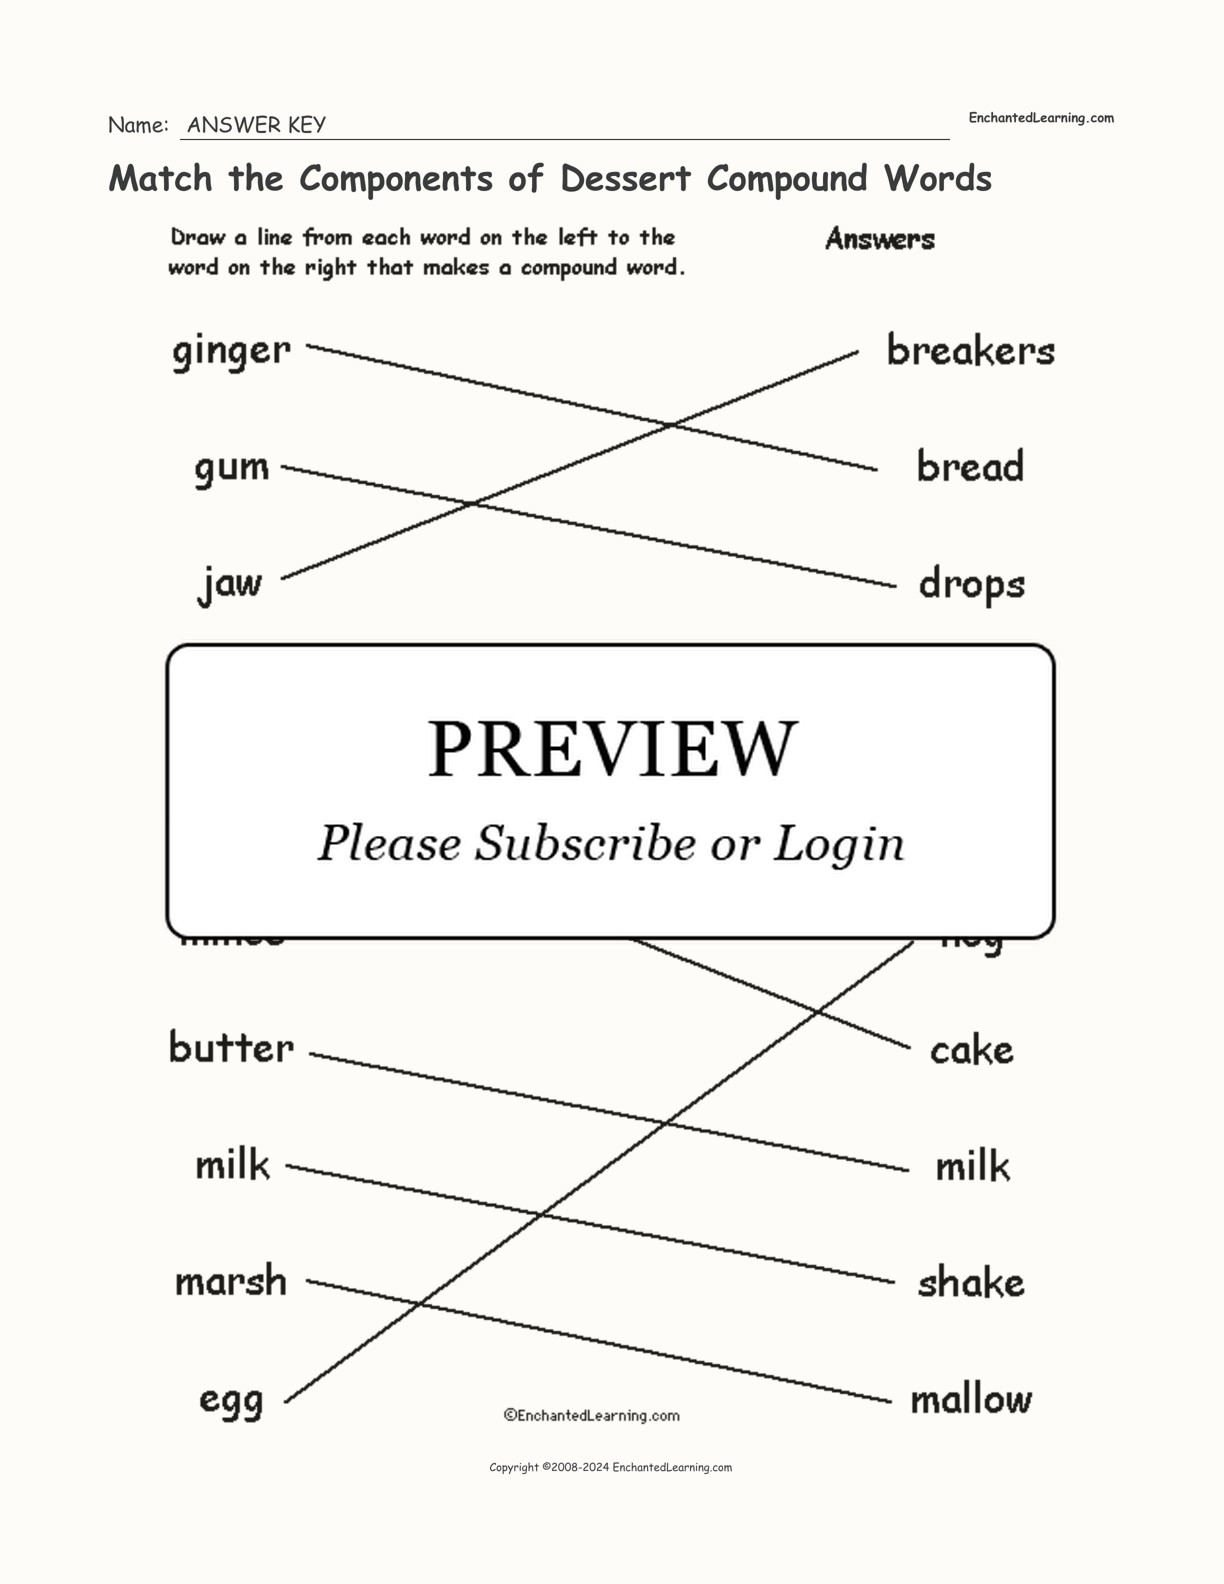 Match the Components of Dessert Compound Words interactive worksheet page 2